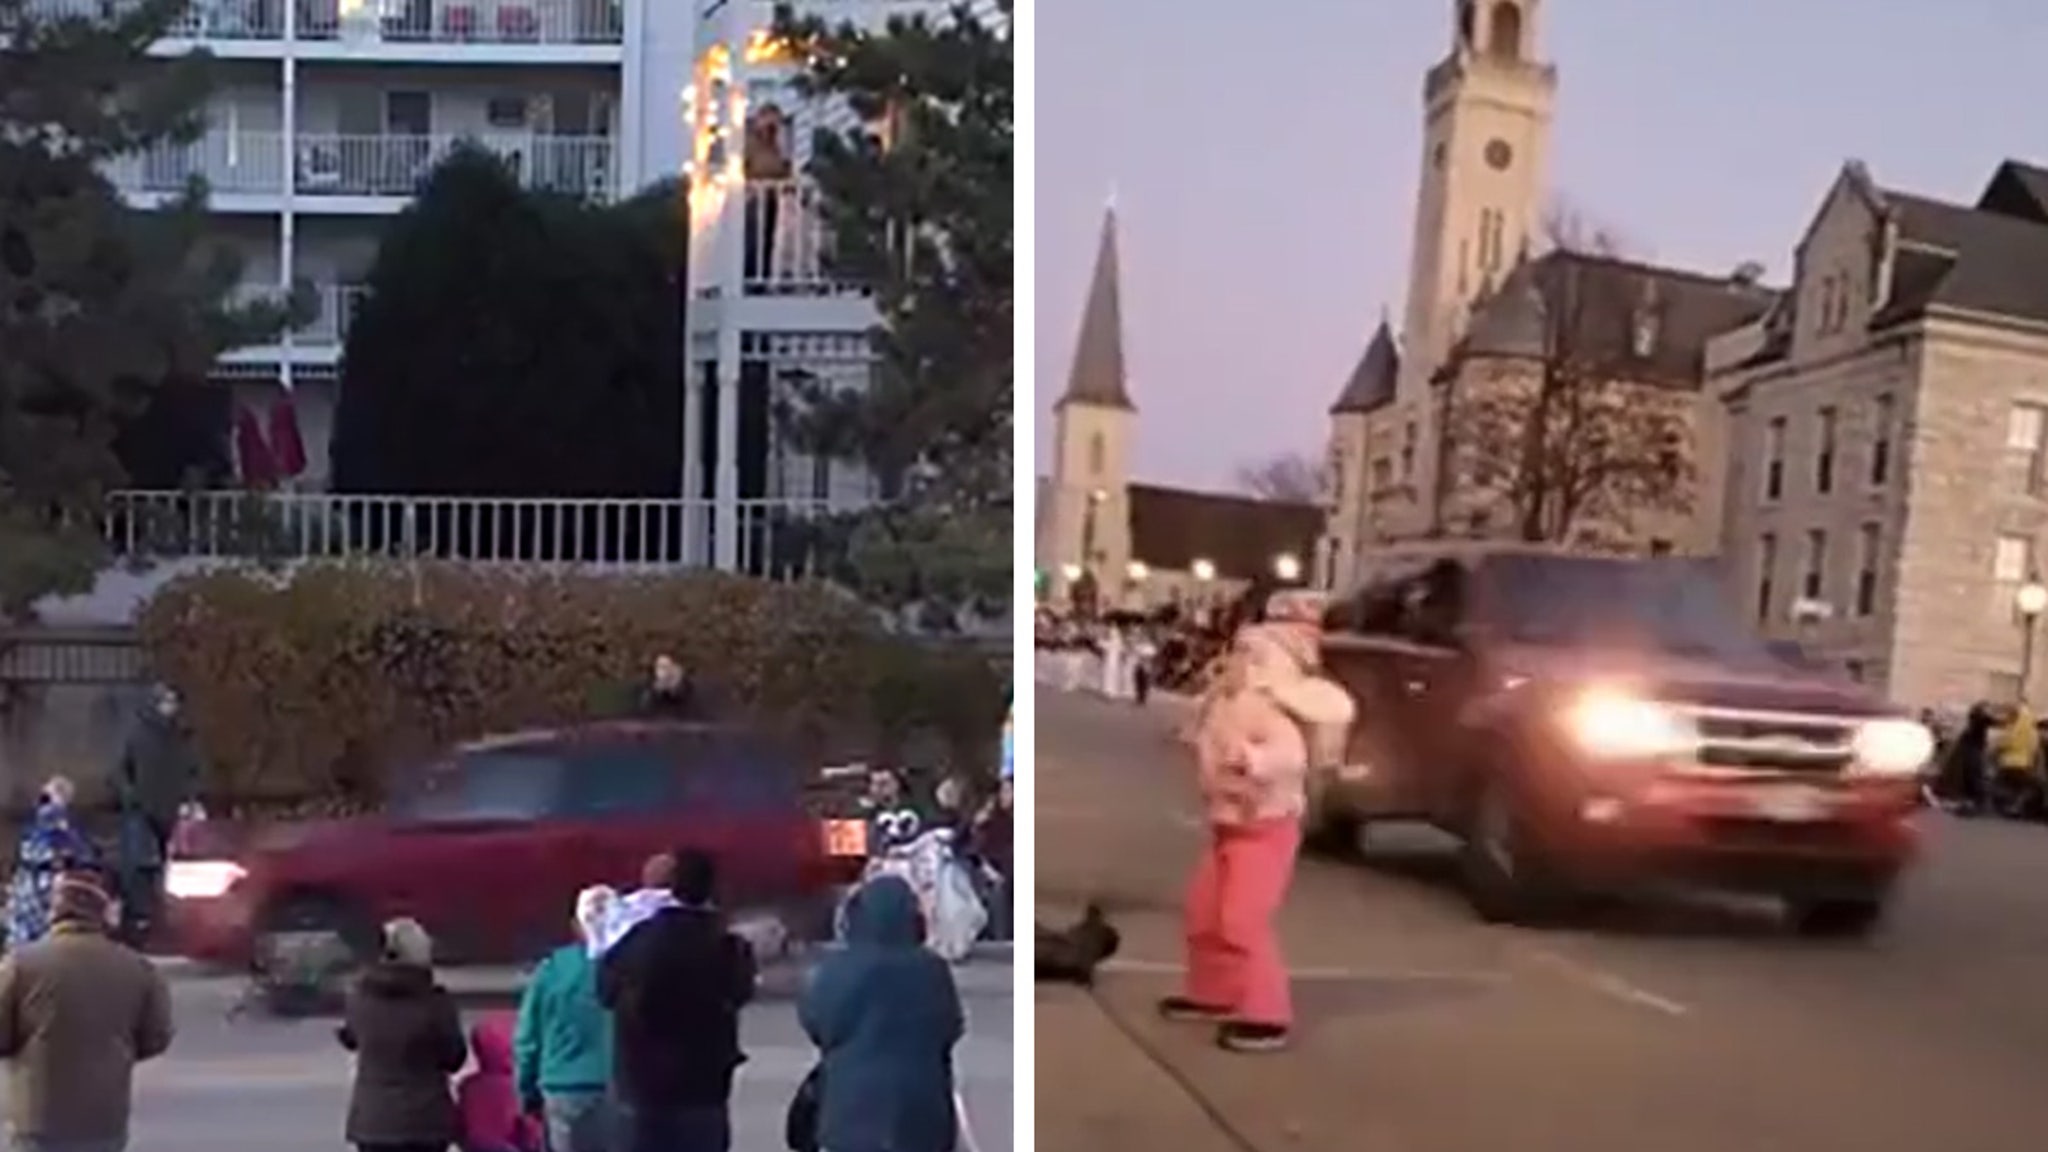 Red SUV Plows Into Parade in Wisconsin, Shots Fired & Crowd Evacuated